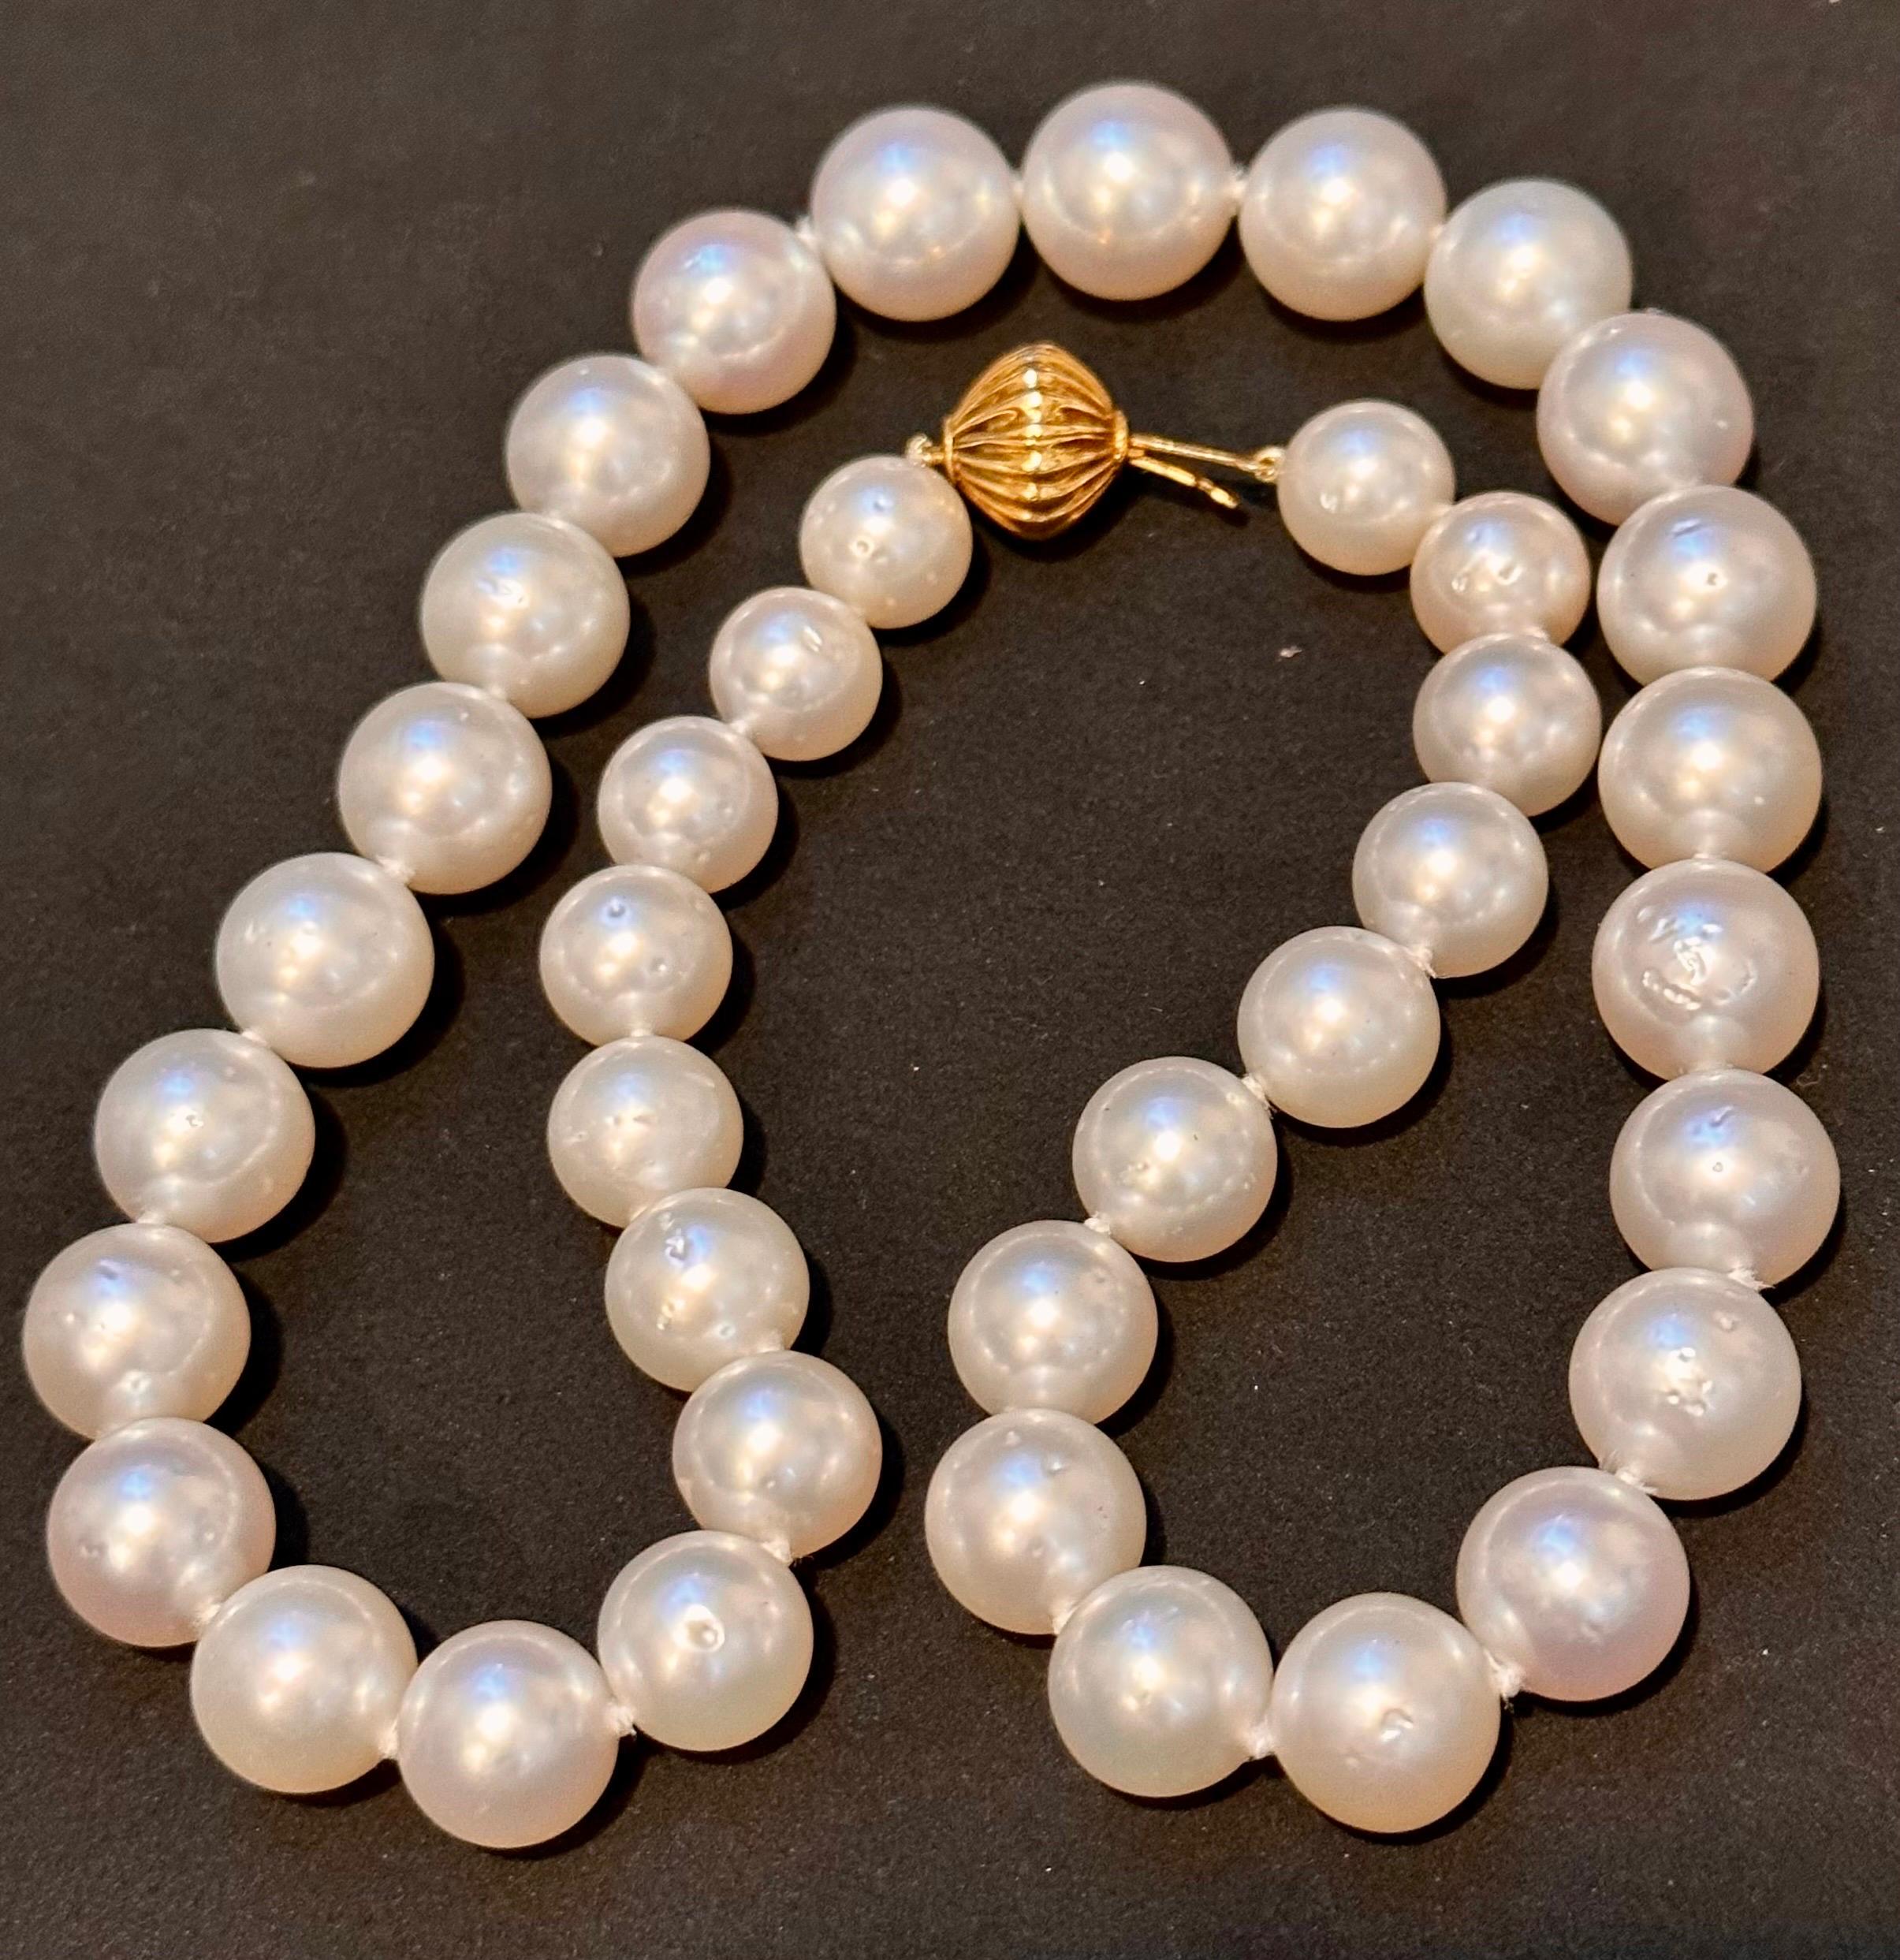 Graduating White South Sea Pearls 9-12mm Strand Necklace 14 Kt Yellow Gold Clasp For Sale 3